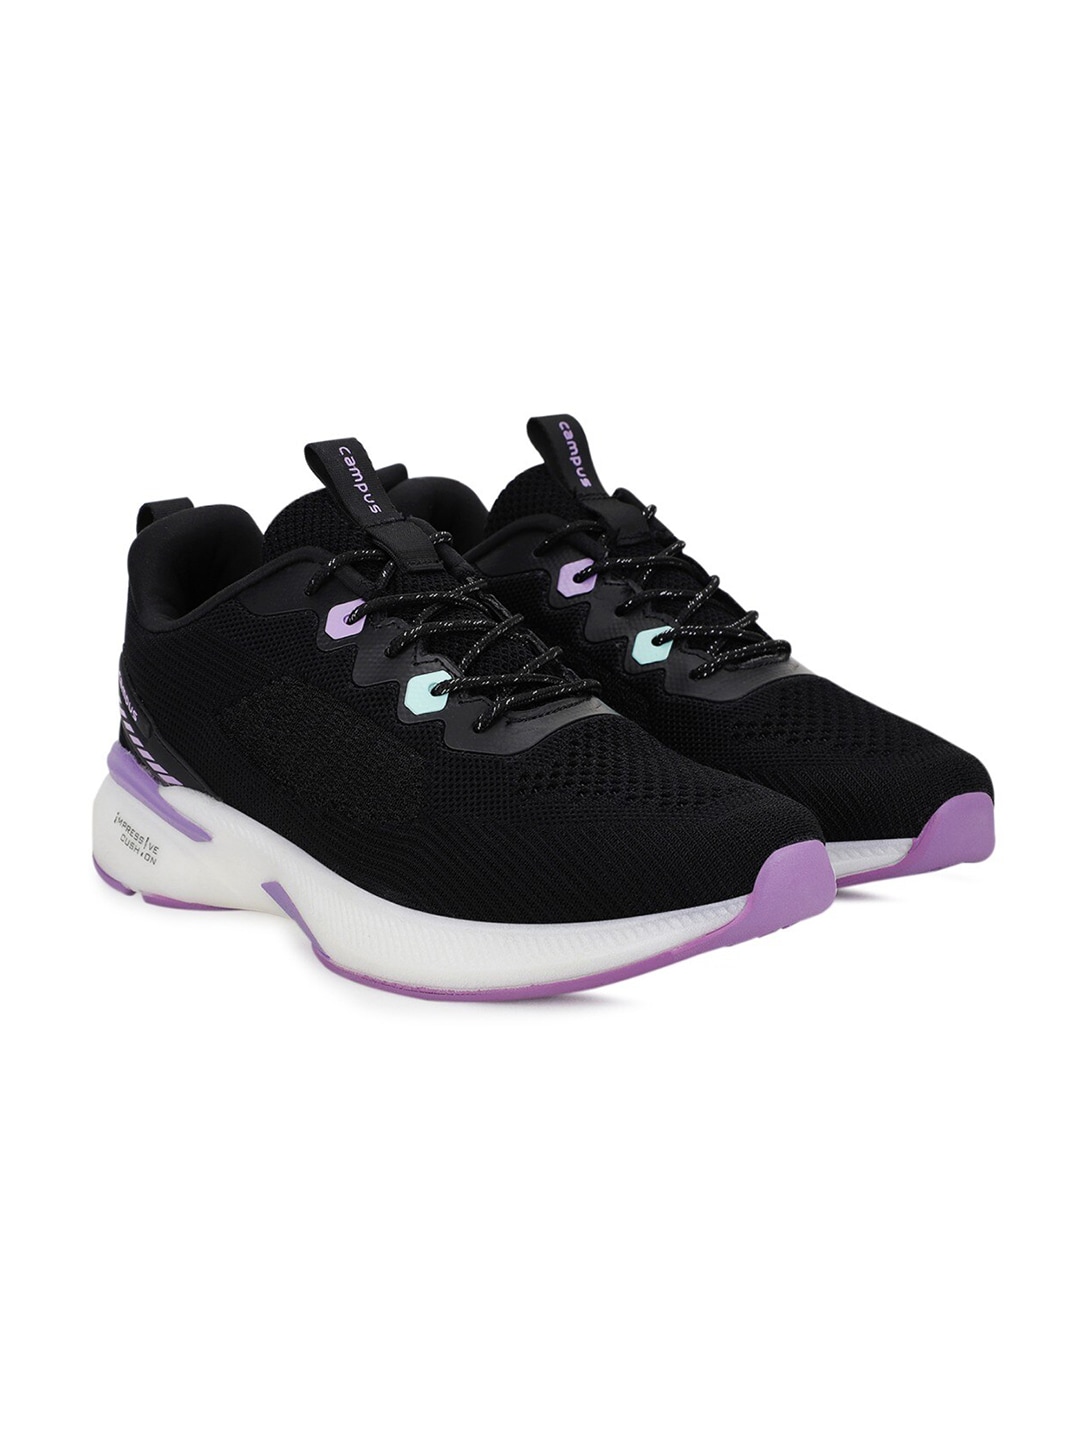 Campus Women Black Textile Running Non-Marking Shoes Price in India